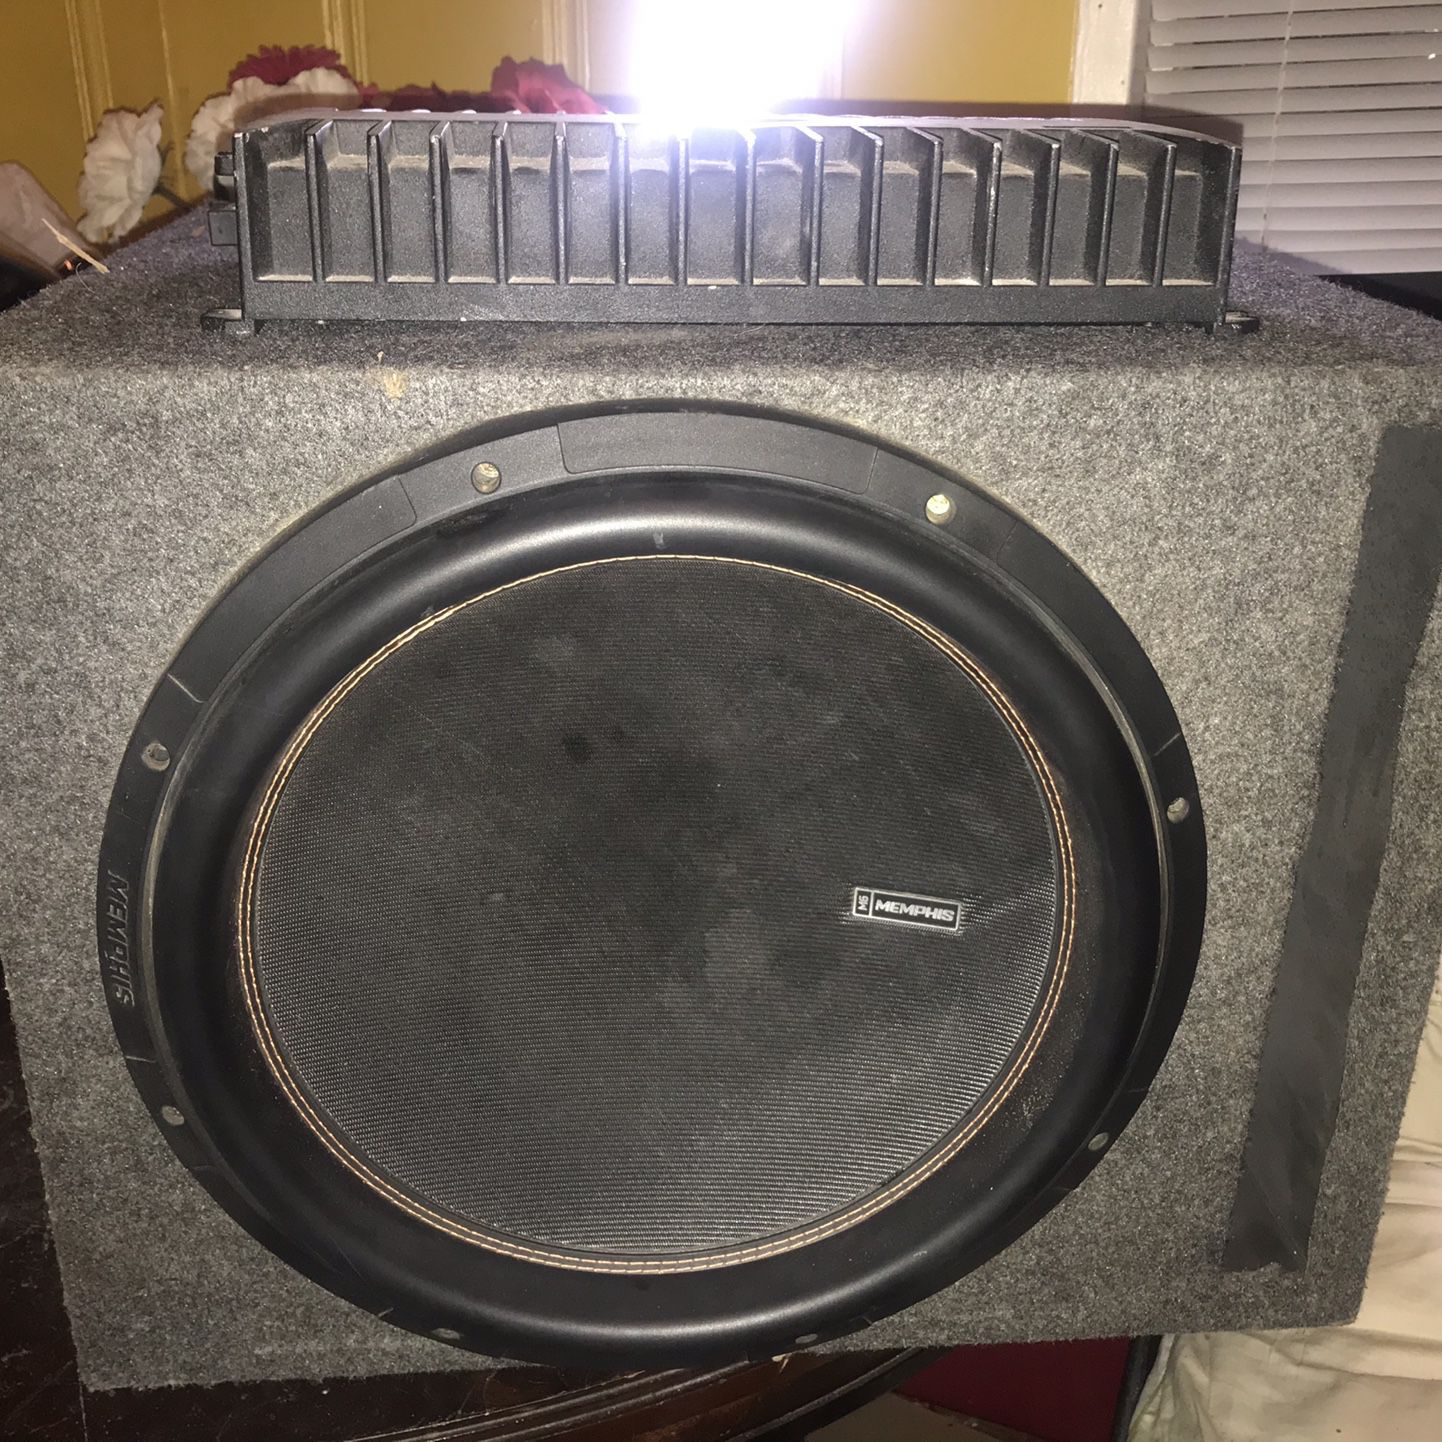 15” M6 Memphis In A Ported Box With Rockford Fosgate Old School Bass Amp